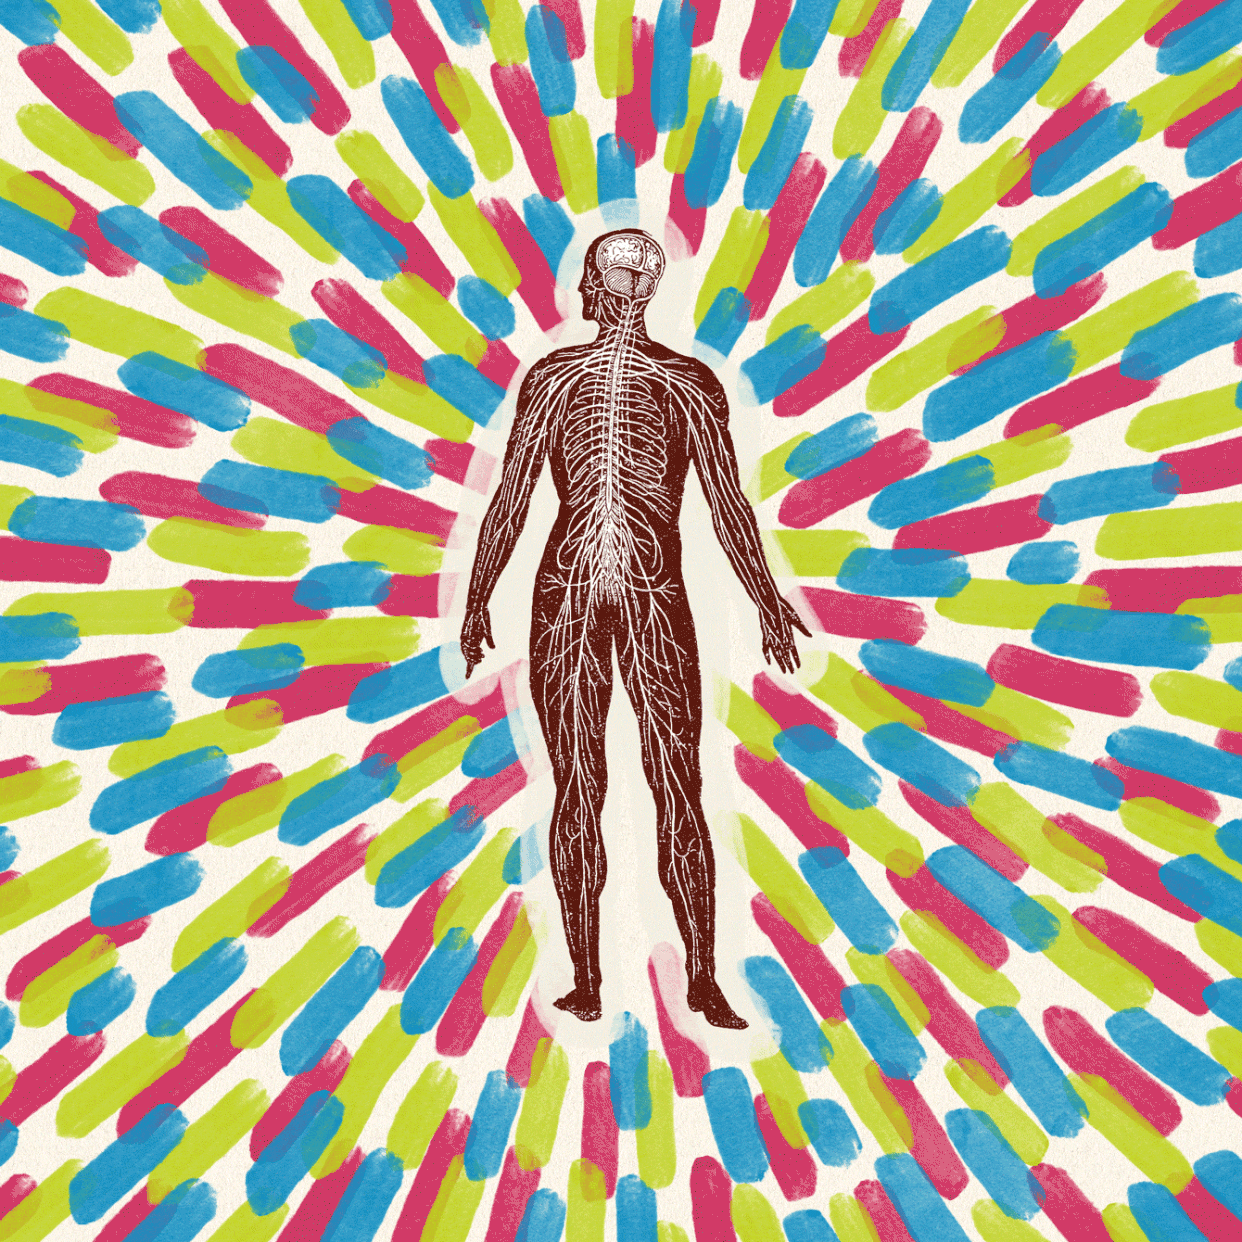 Illustration of a human anatomy figure showing nervous system with color dashes radiating outward